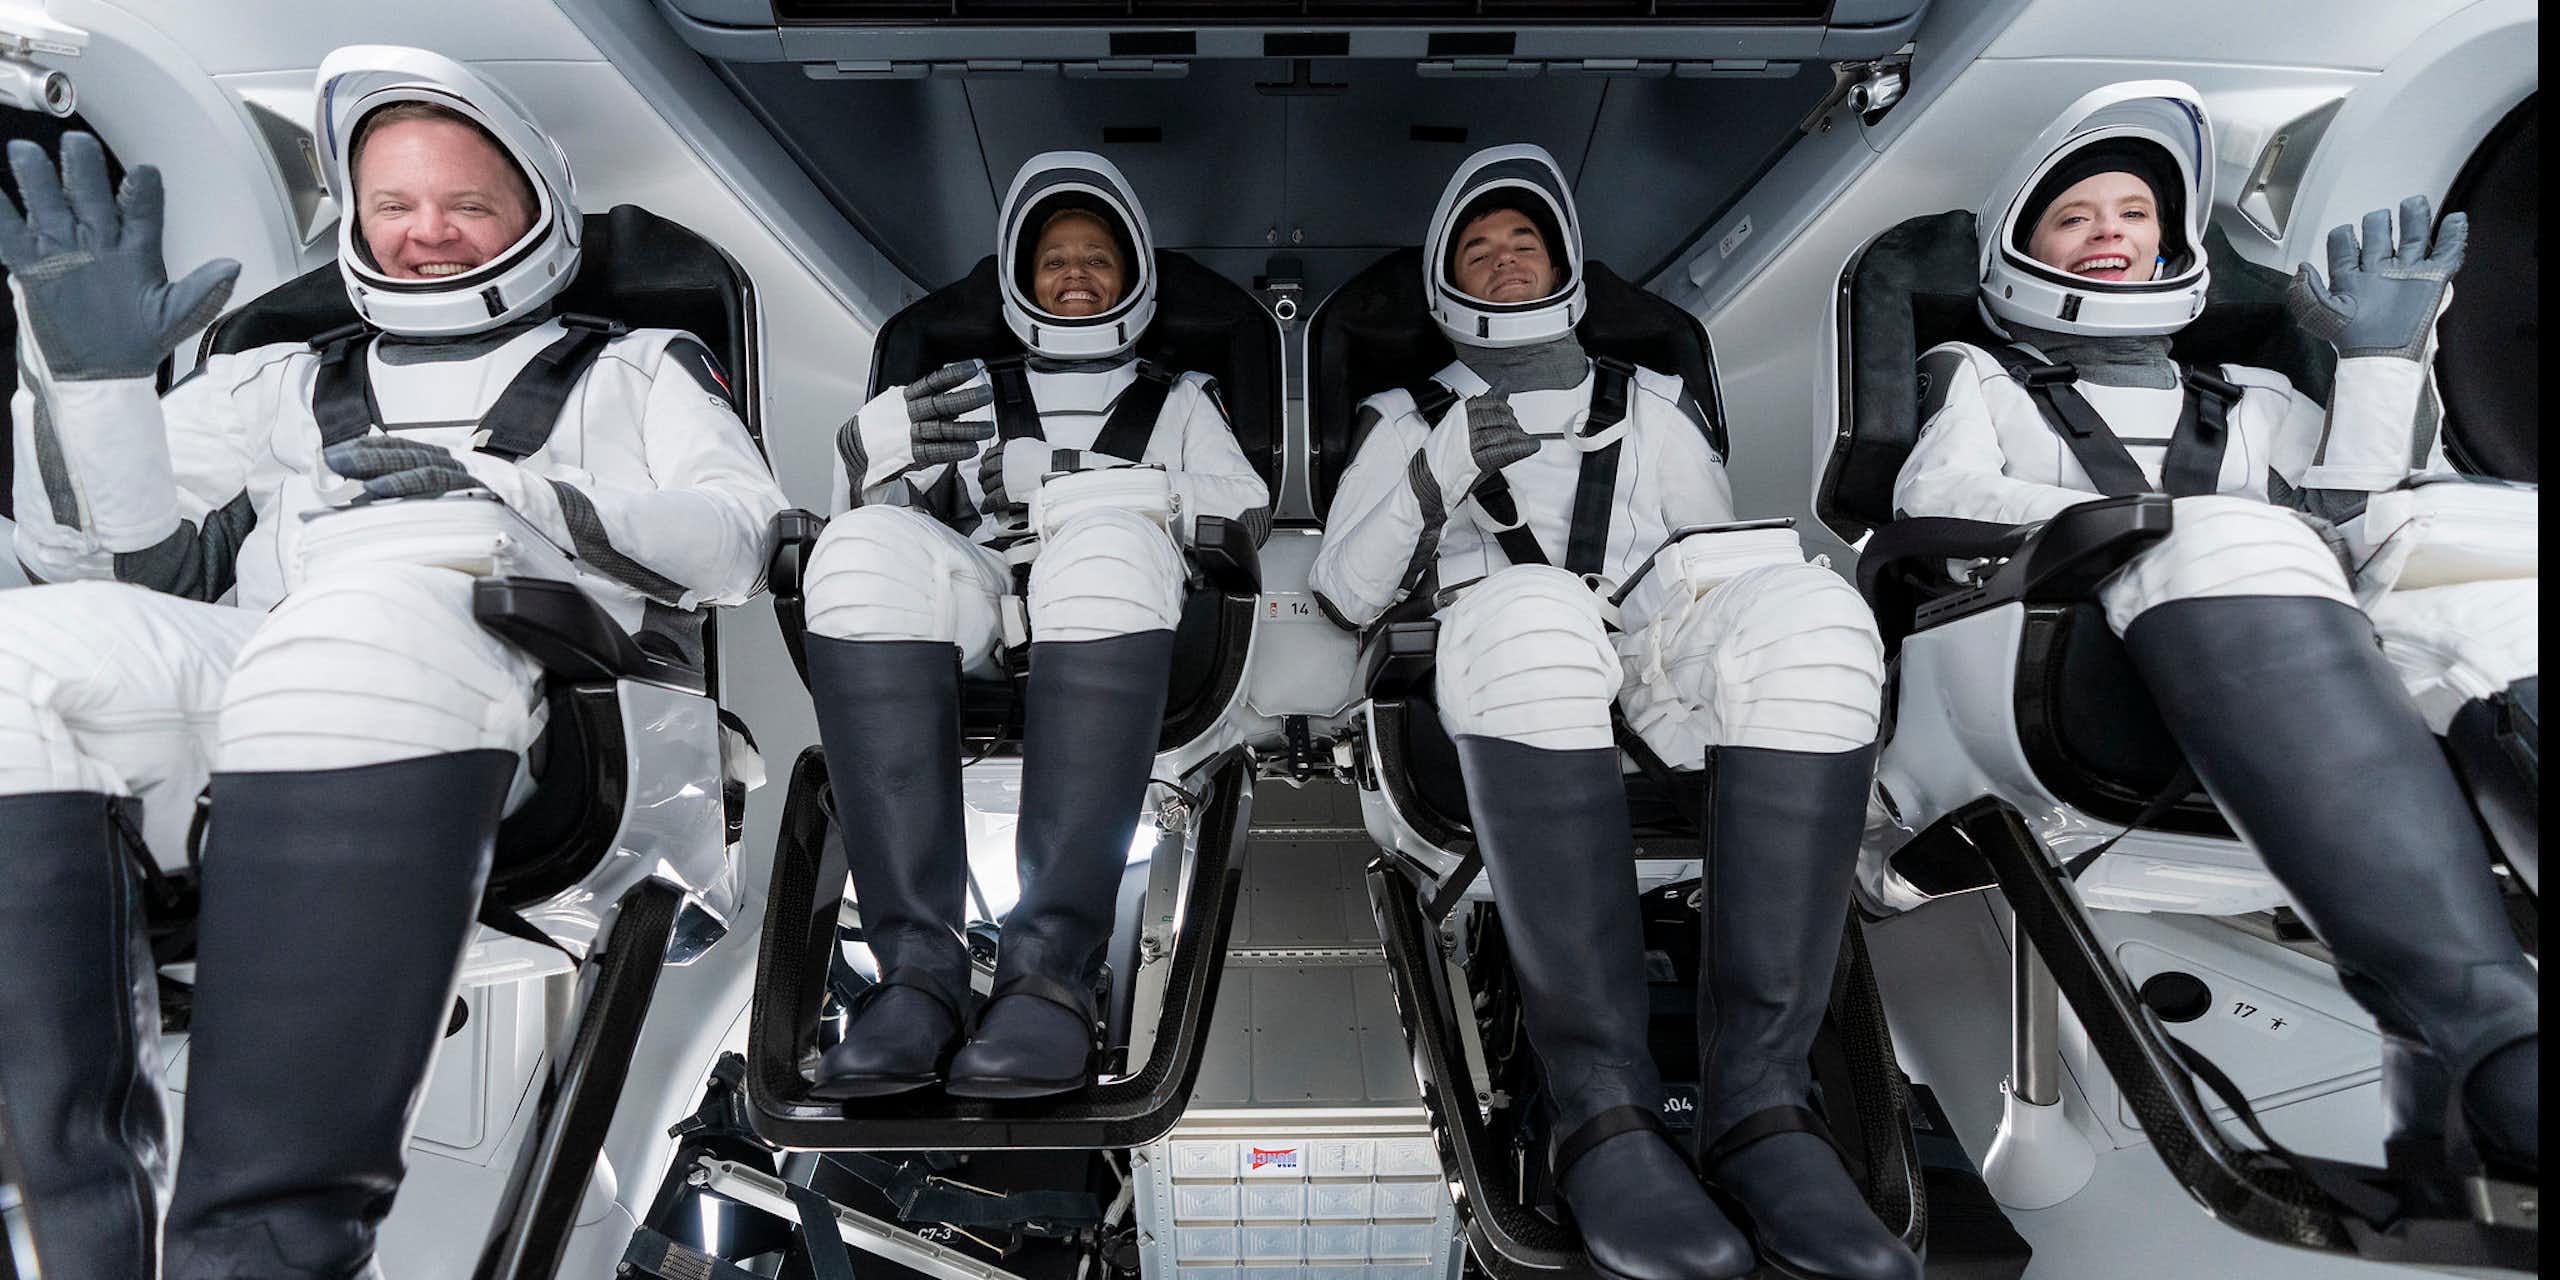 Four smiling people wearing white space suits.